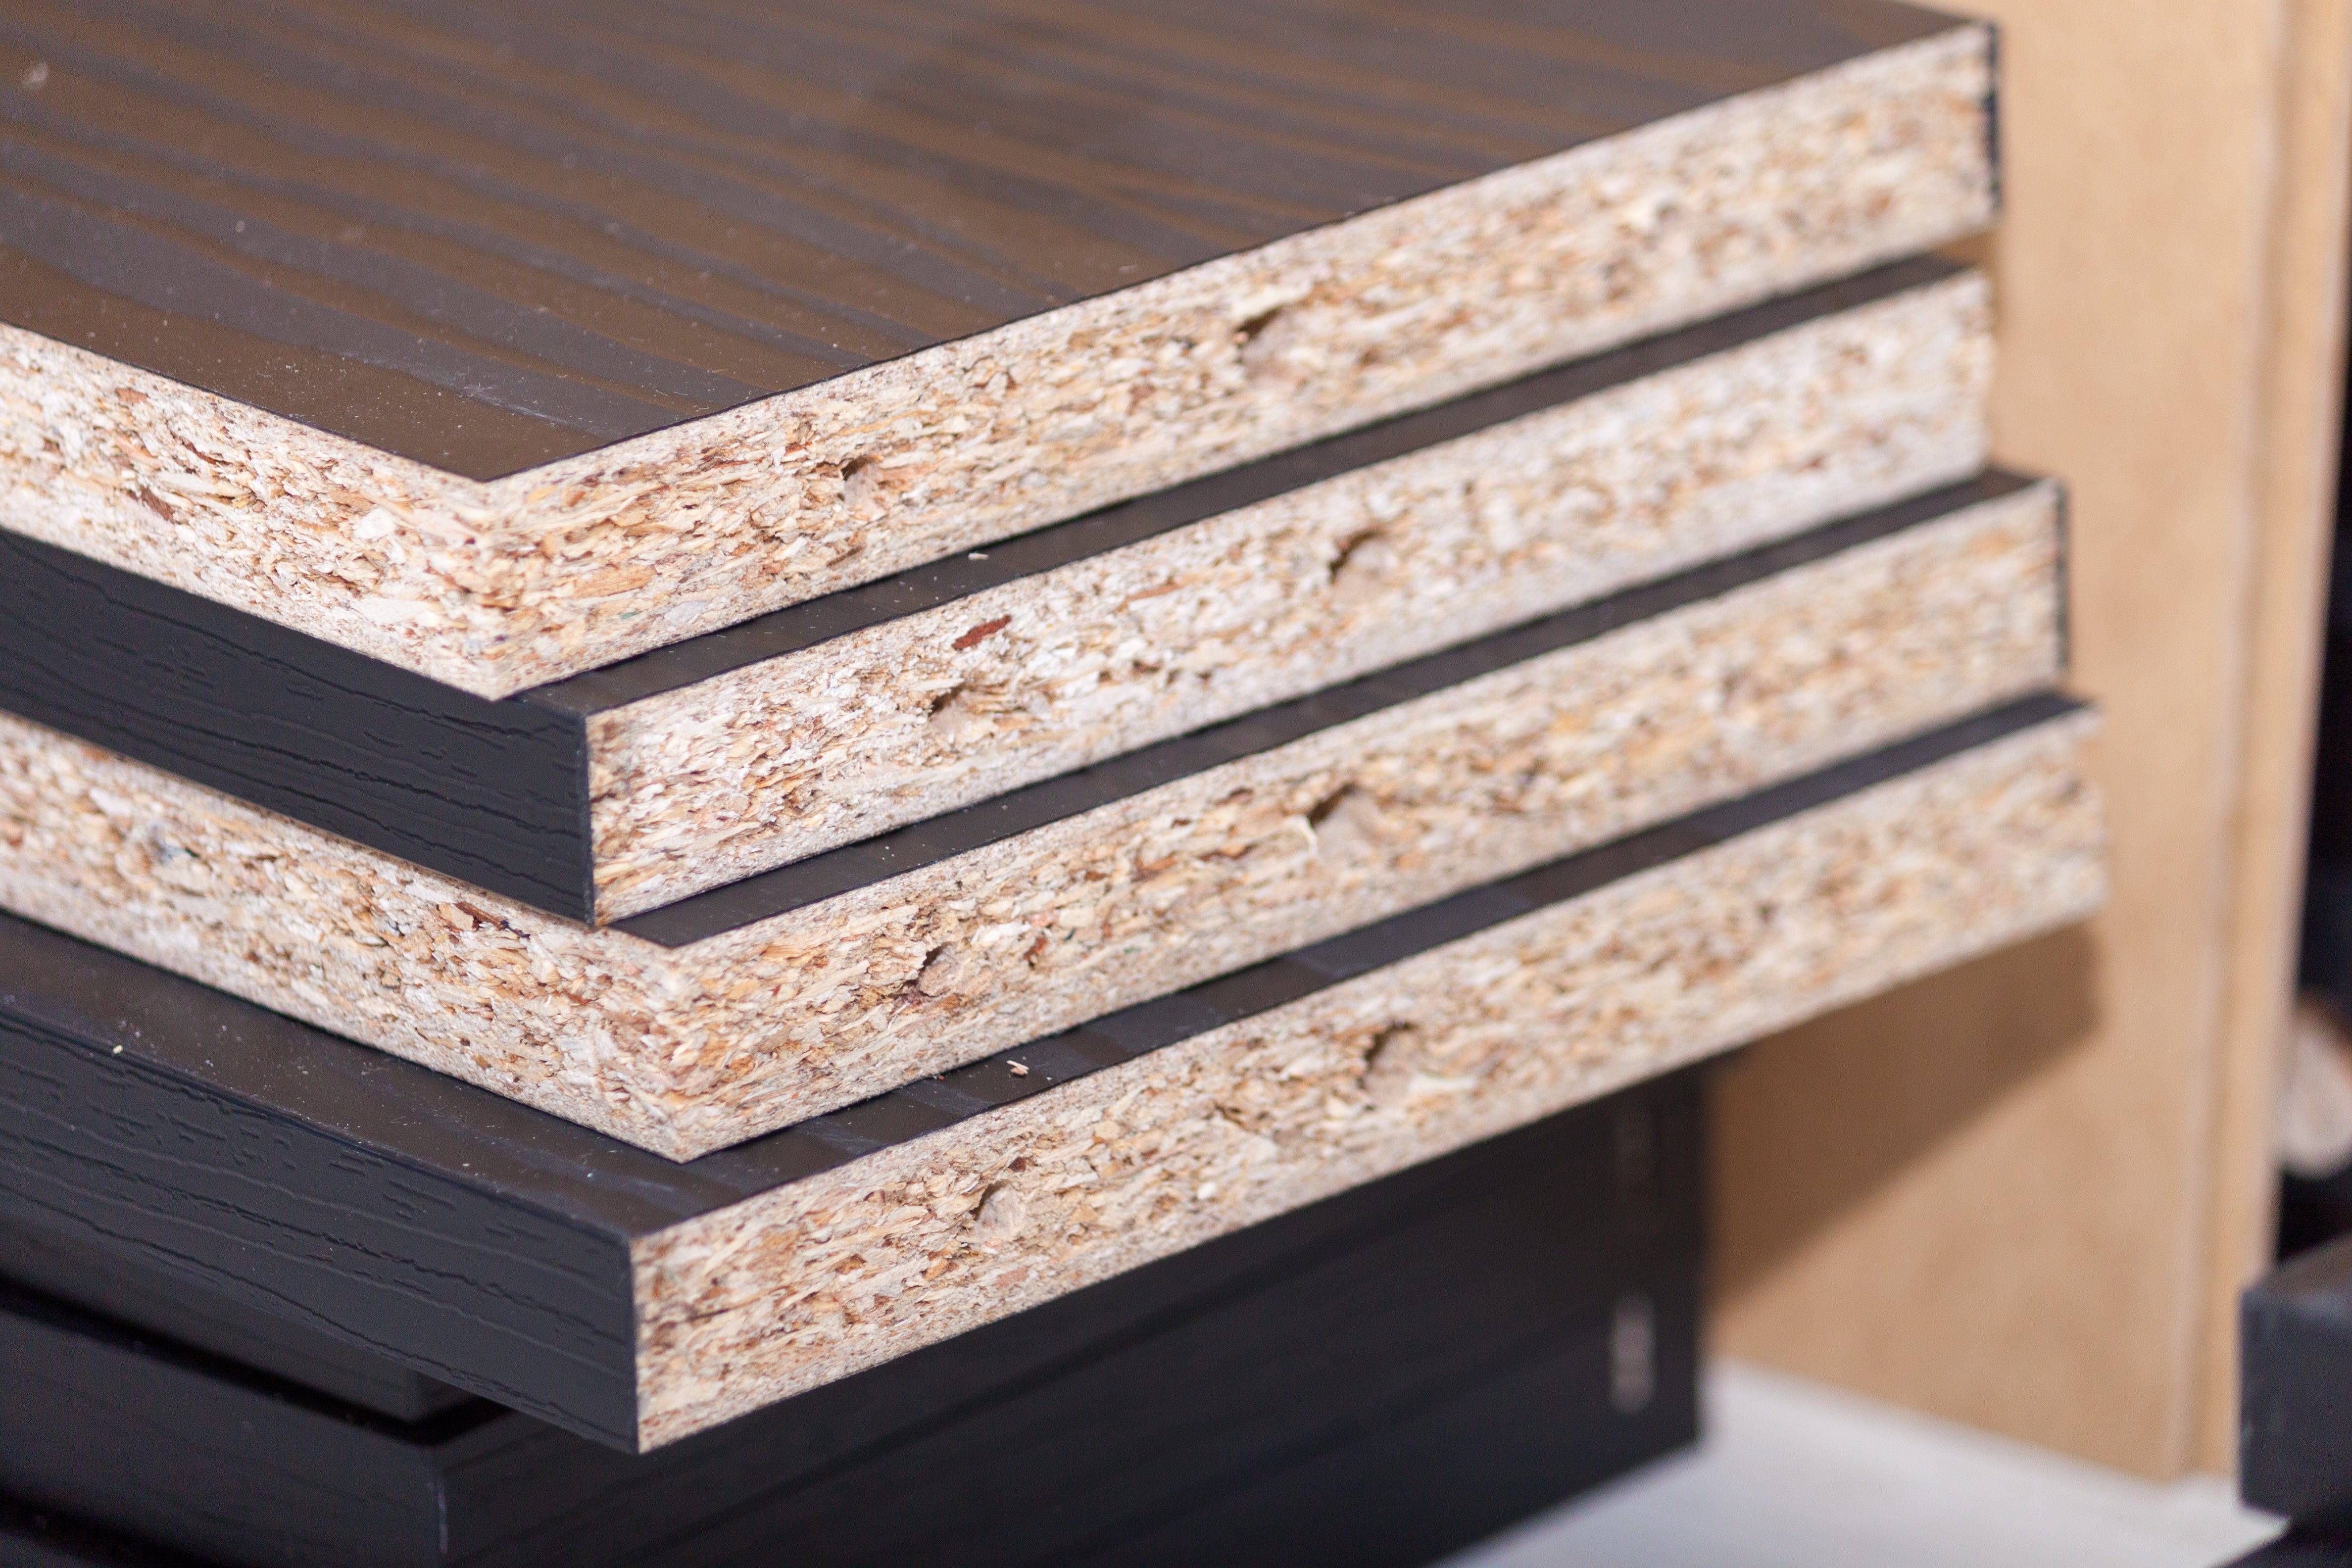 What is MDF? The Pros and Cons of MDF vs Real Wood